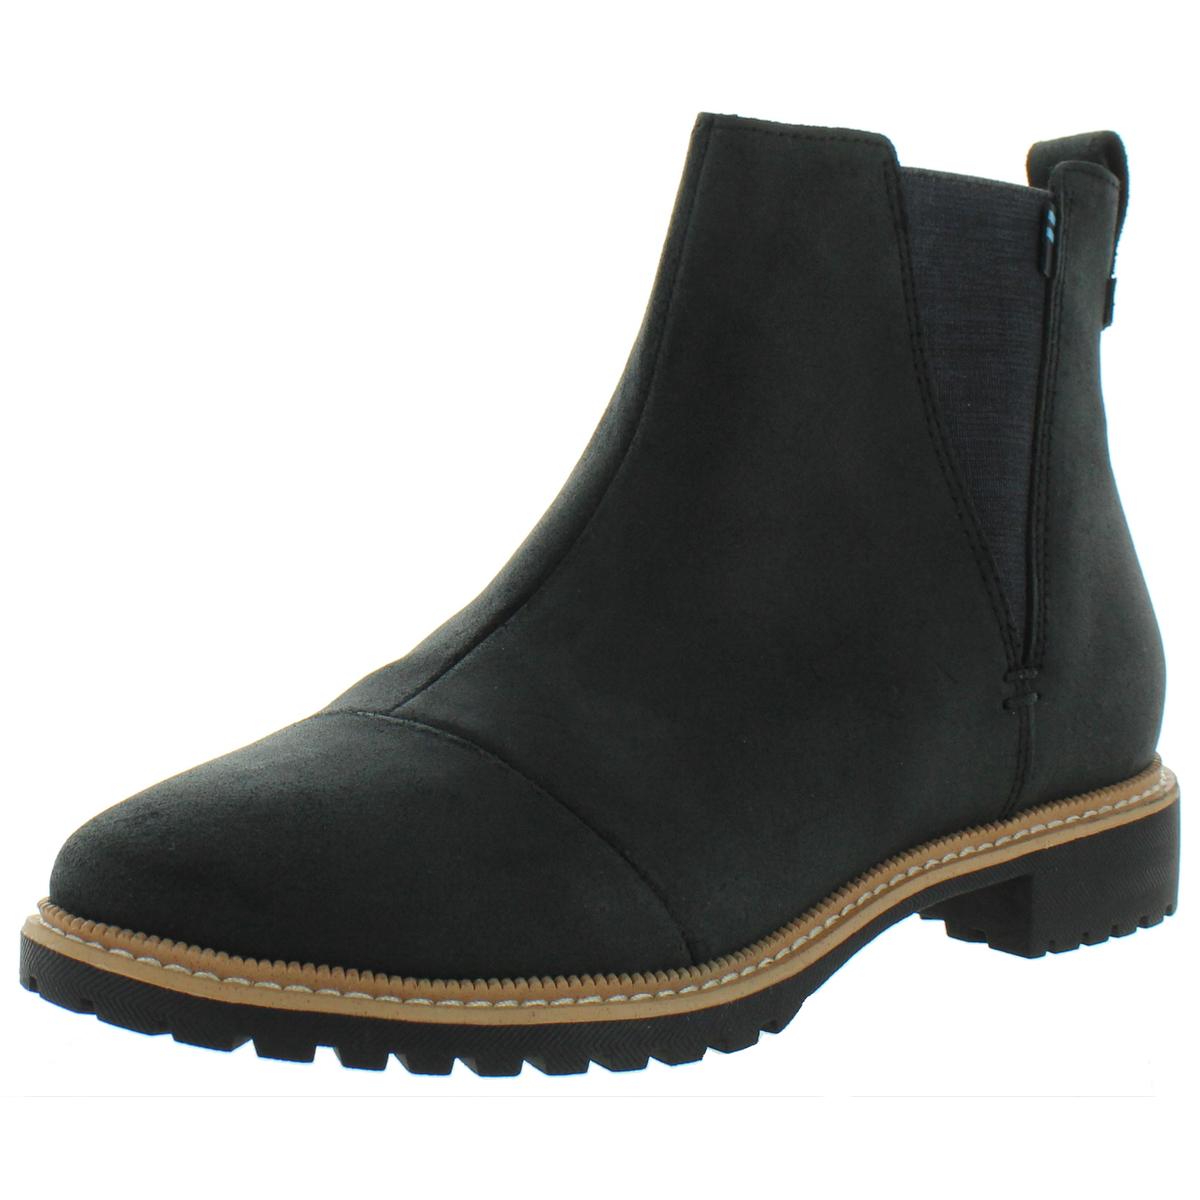 Toms Womens Cleo Black Leather Ankle Boots Shoes 7.5 Medium (B,M) BHFO ...